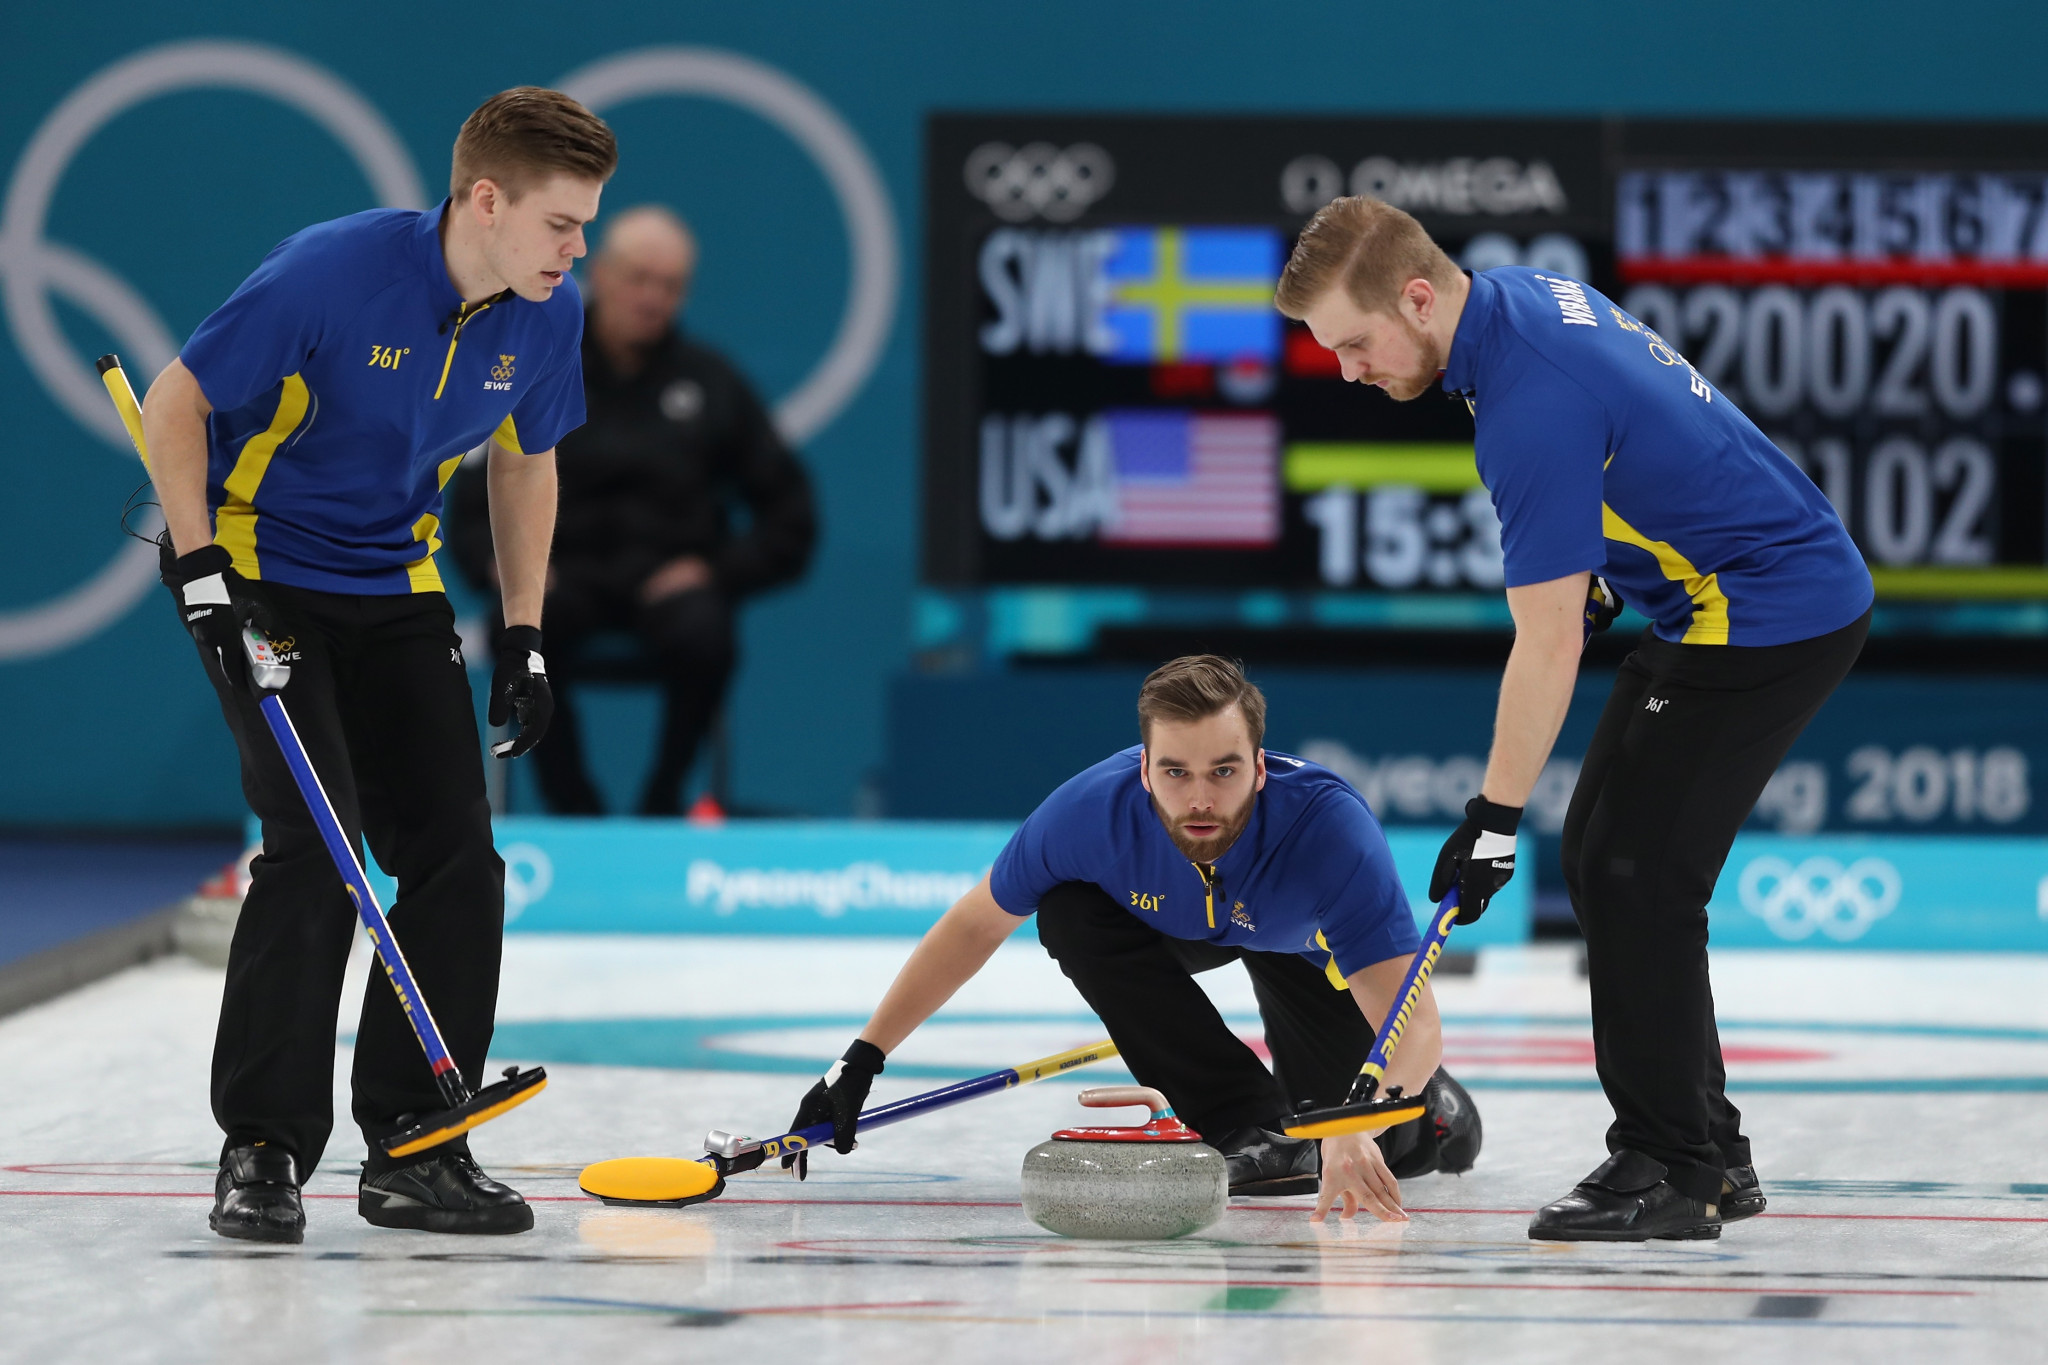 Sweden twice led in the final but ultimately had to settle for the silver medal ©Getty Images